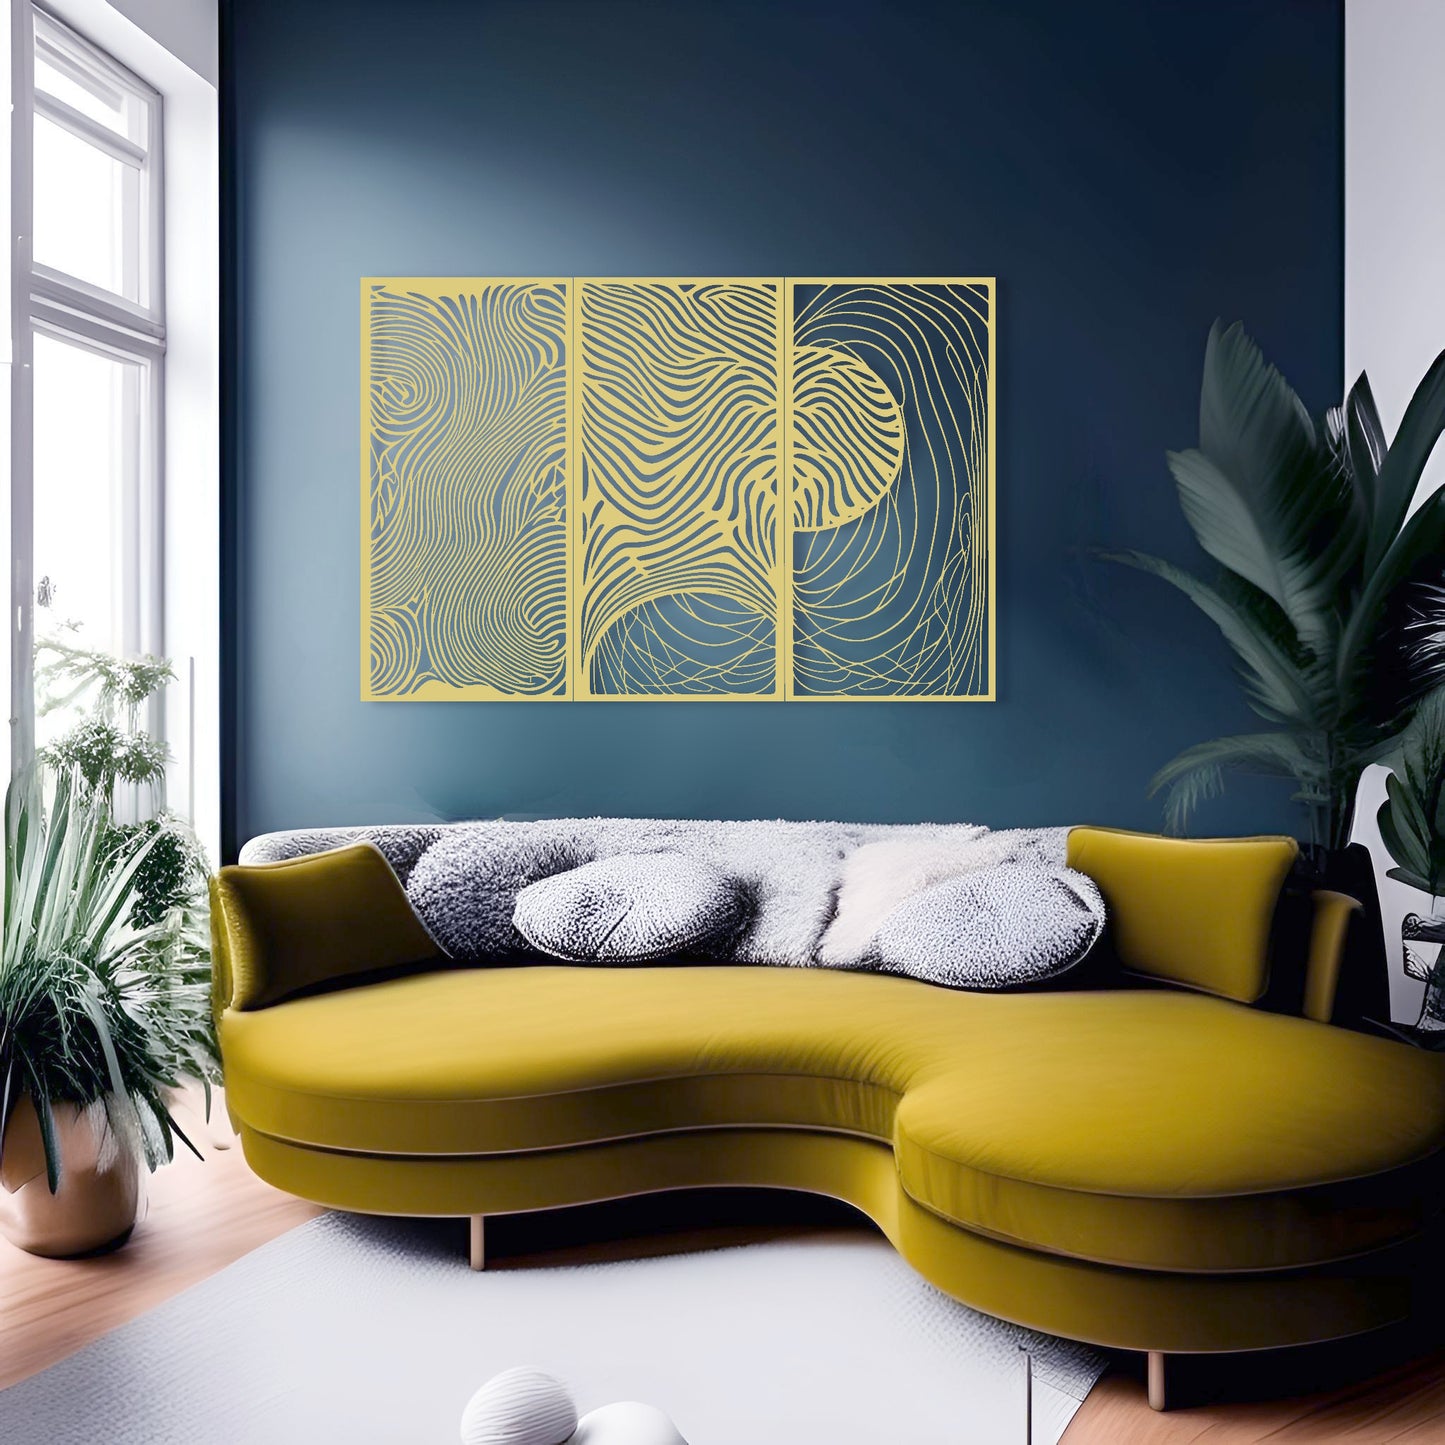 Intricate Abstract Waves - Set of Three Metal Wall Art Panels